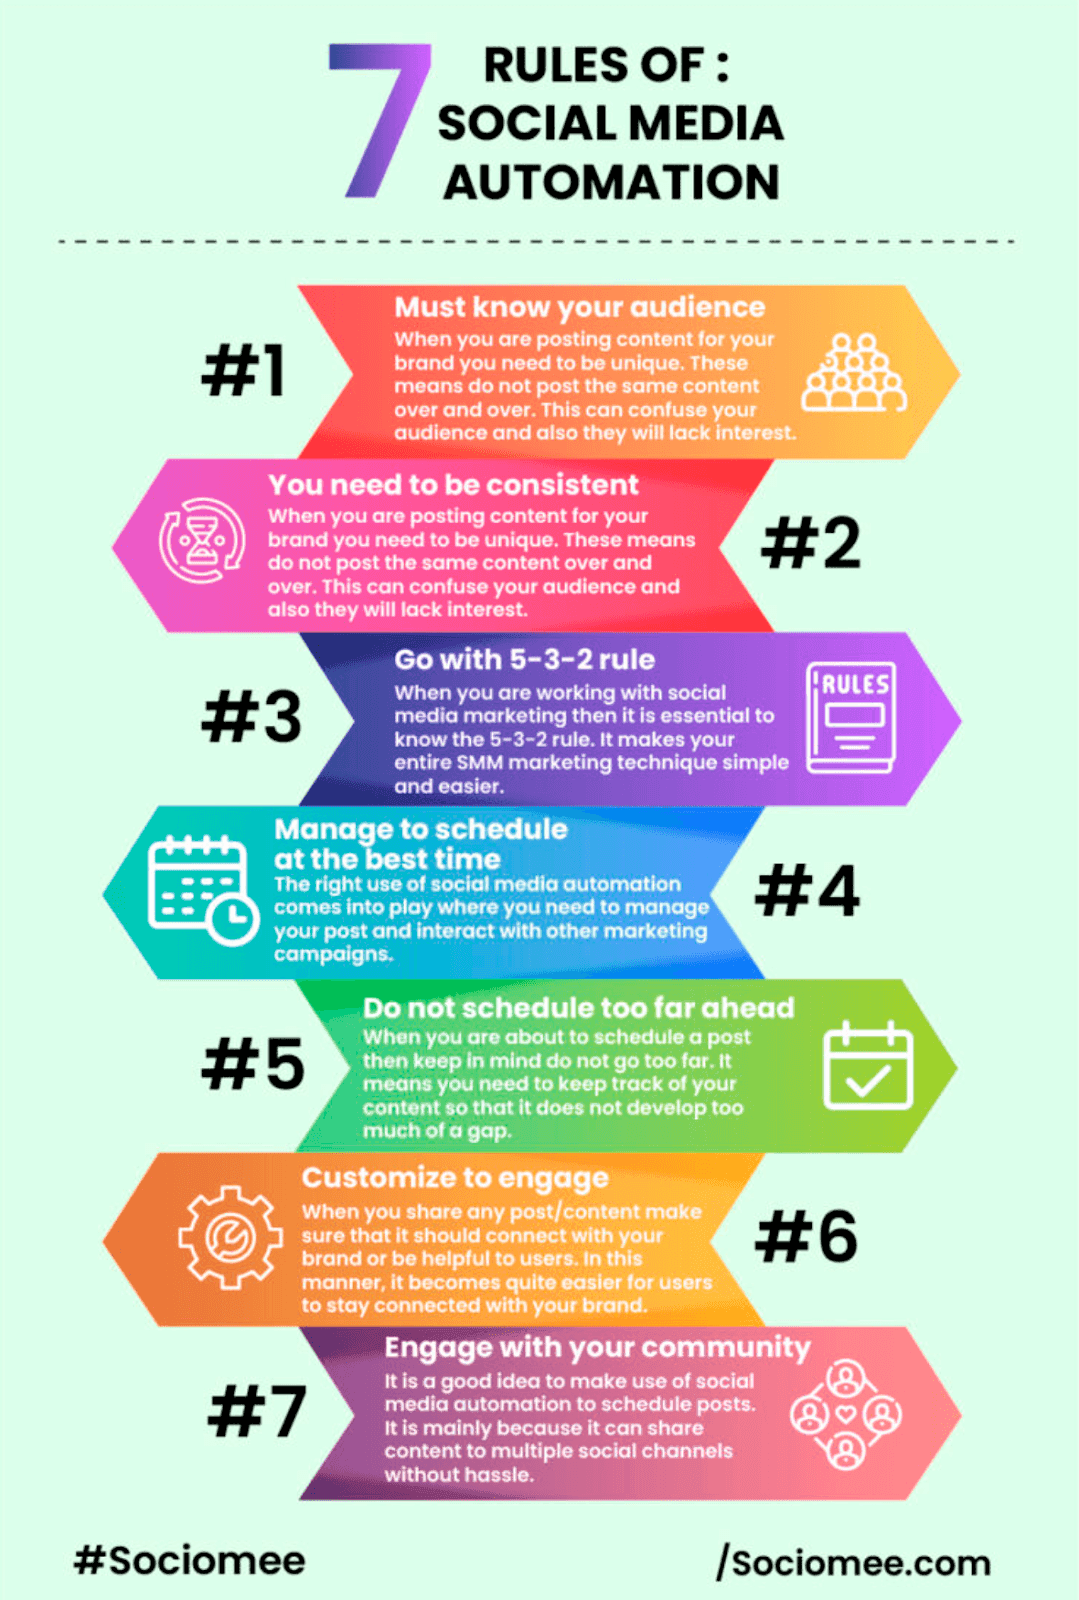 7 rules of social media automation